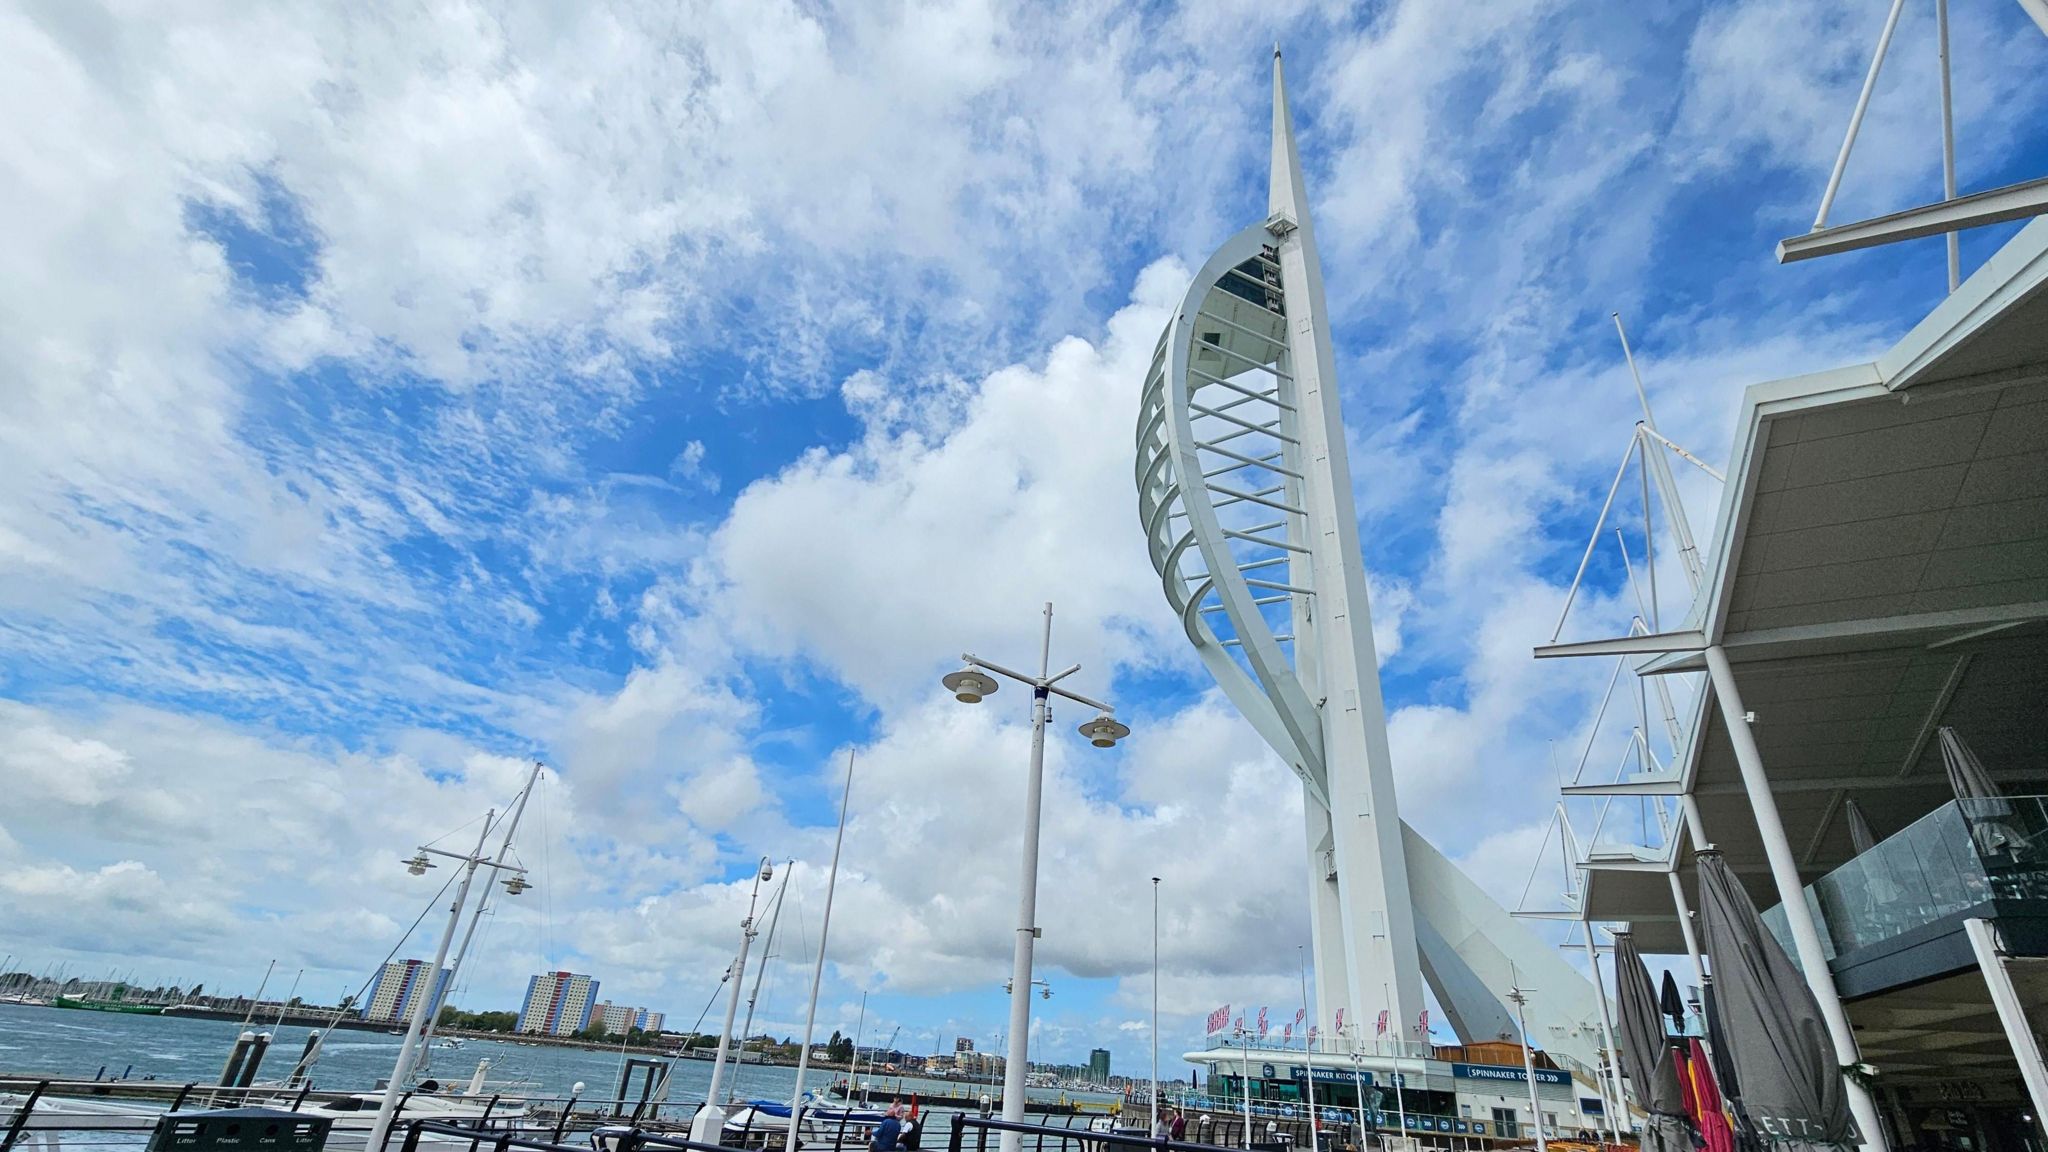 The Spinnaker Tower under sunny skies in Portsmouth